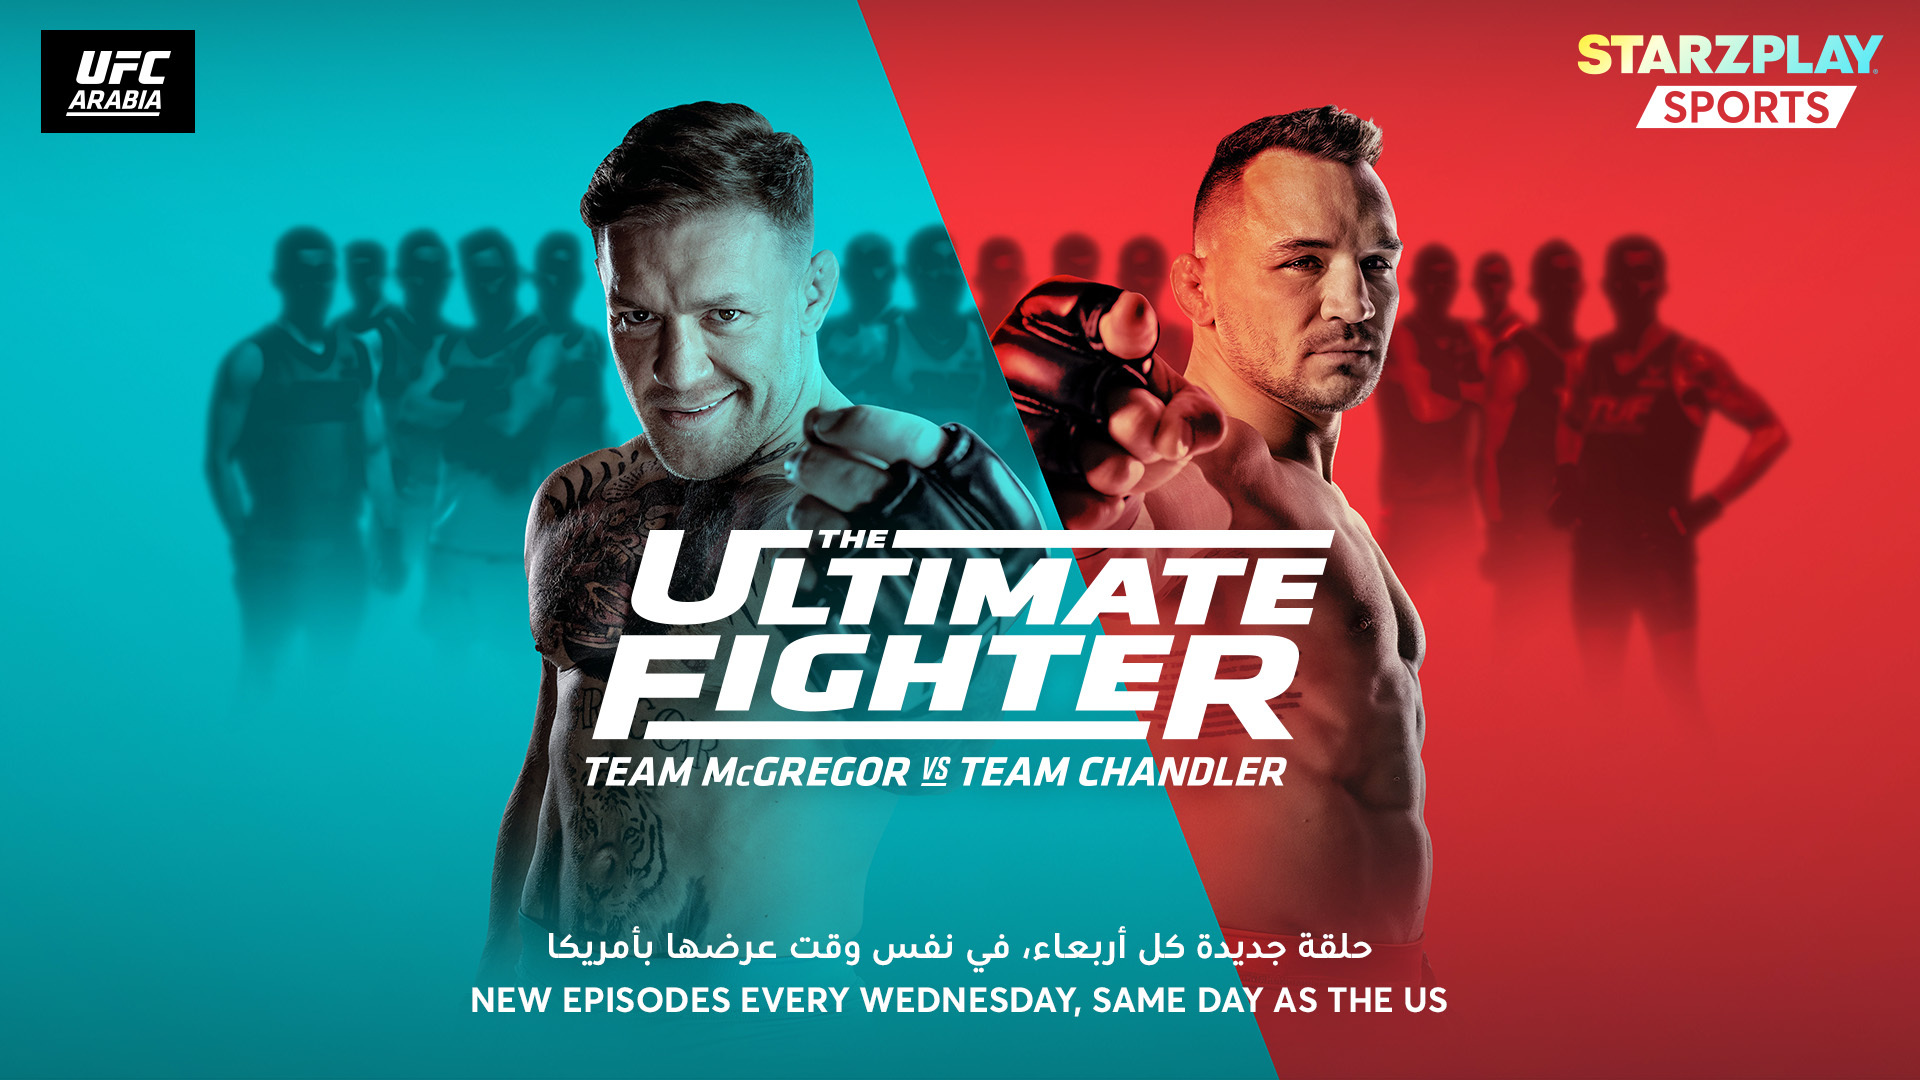 STARZPLAY to show UFC’s The Ultimate Fighter: Team McGregor vs Team Chandler